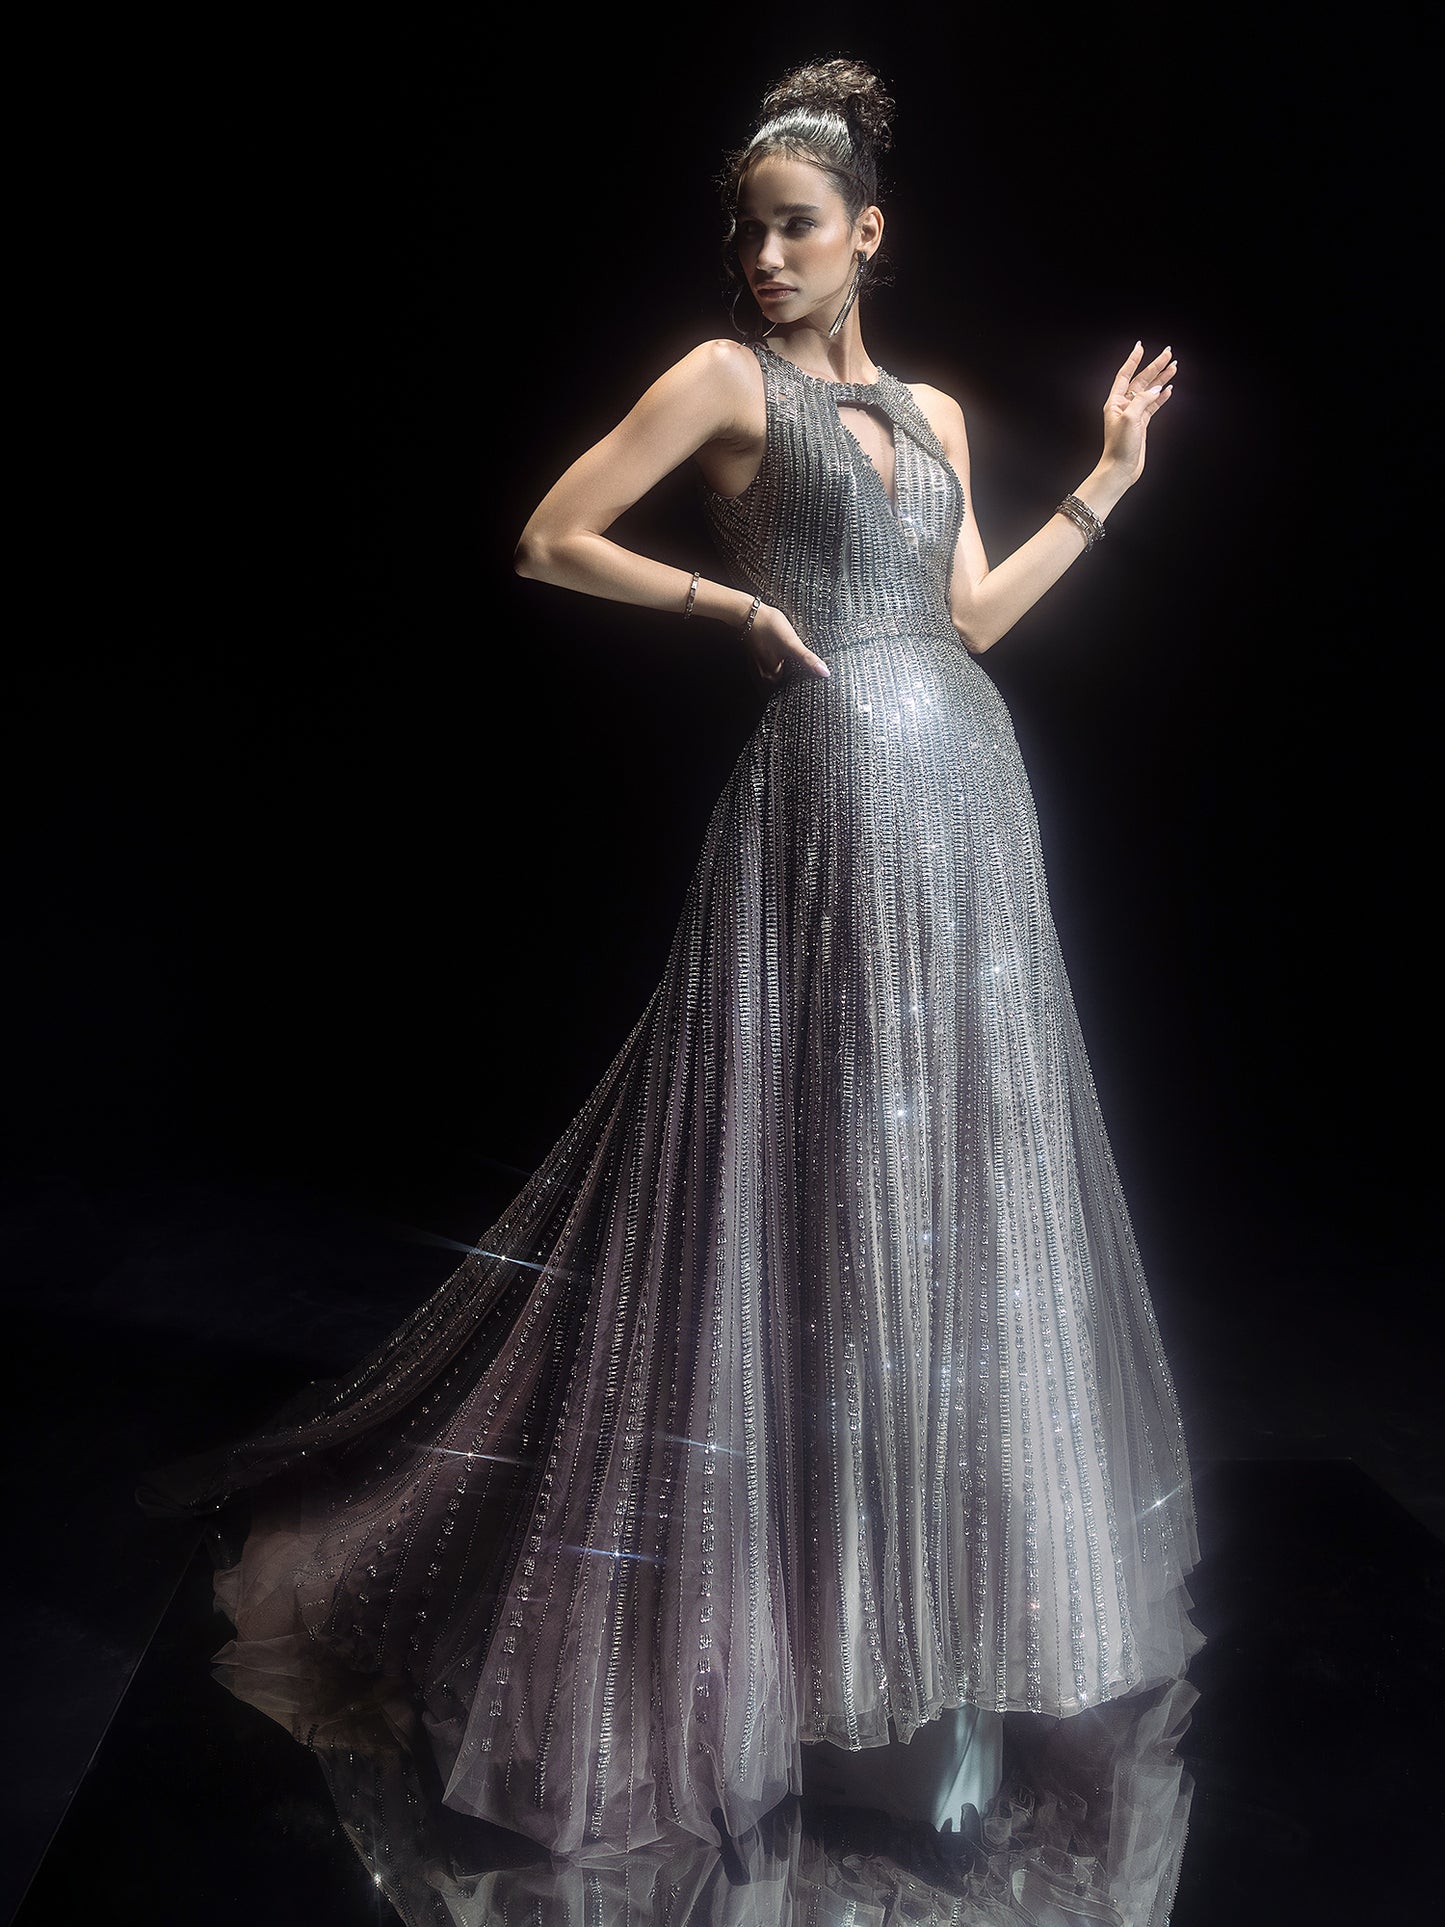 Fully Embellished crystals And Metallic Stripes Gown